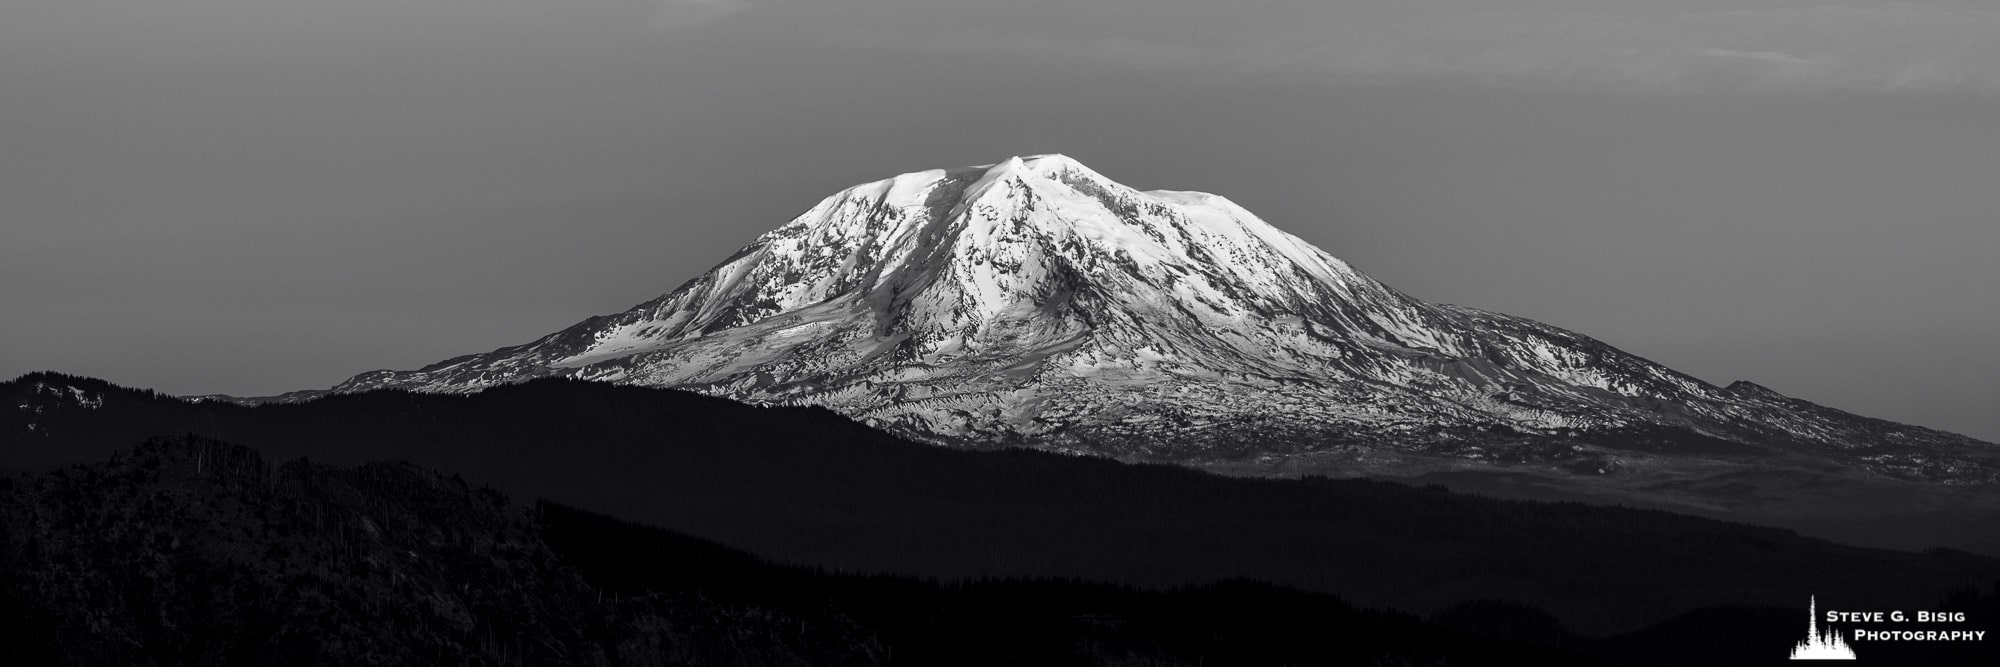 A black and white panoramic landscape photograph of Mt. Adams as viewed from Windy Ridge in Skamania County, Washington.